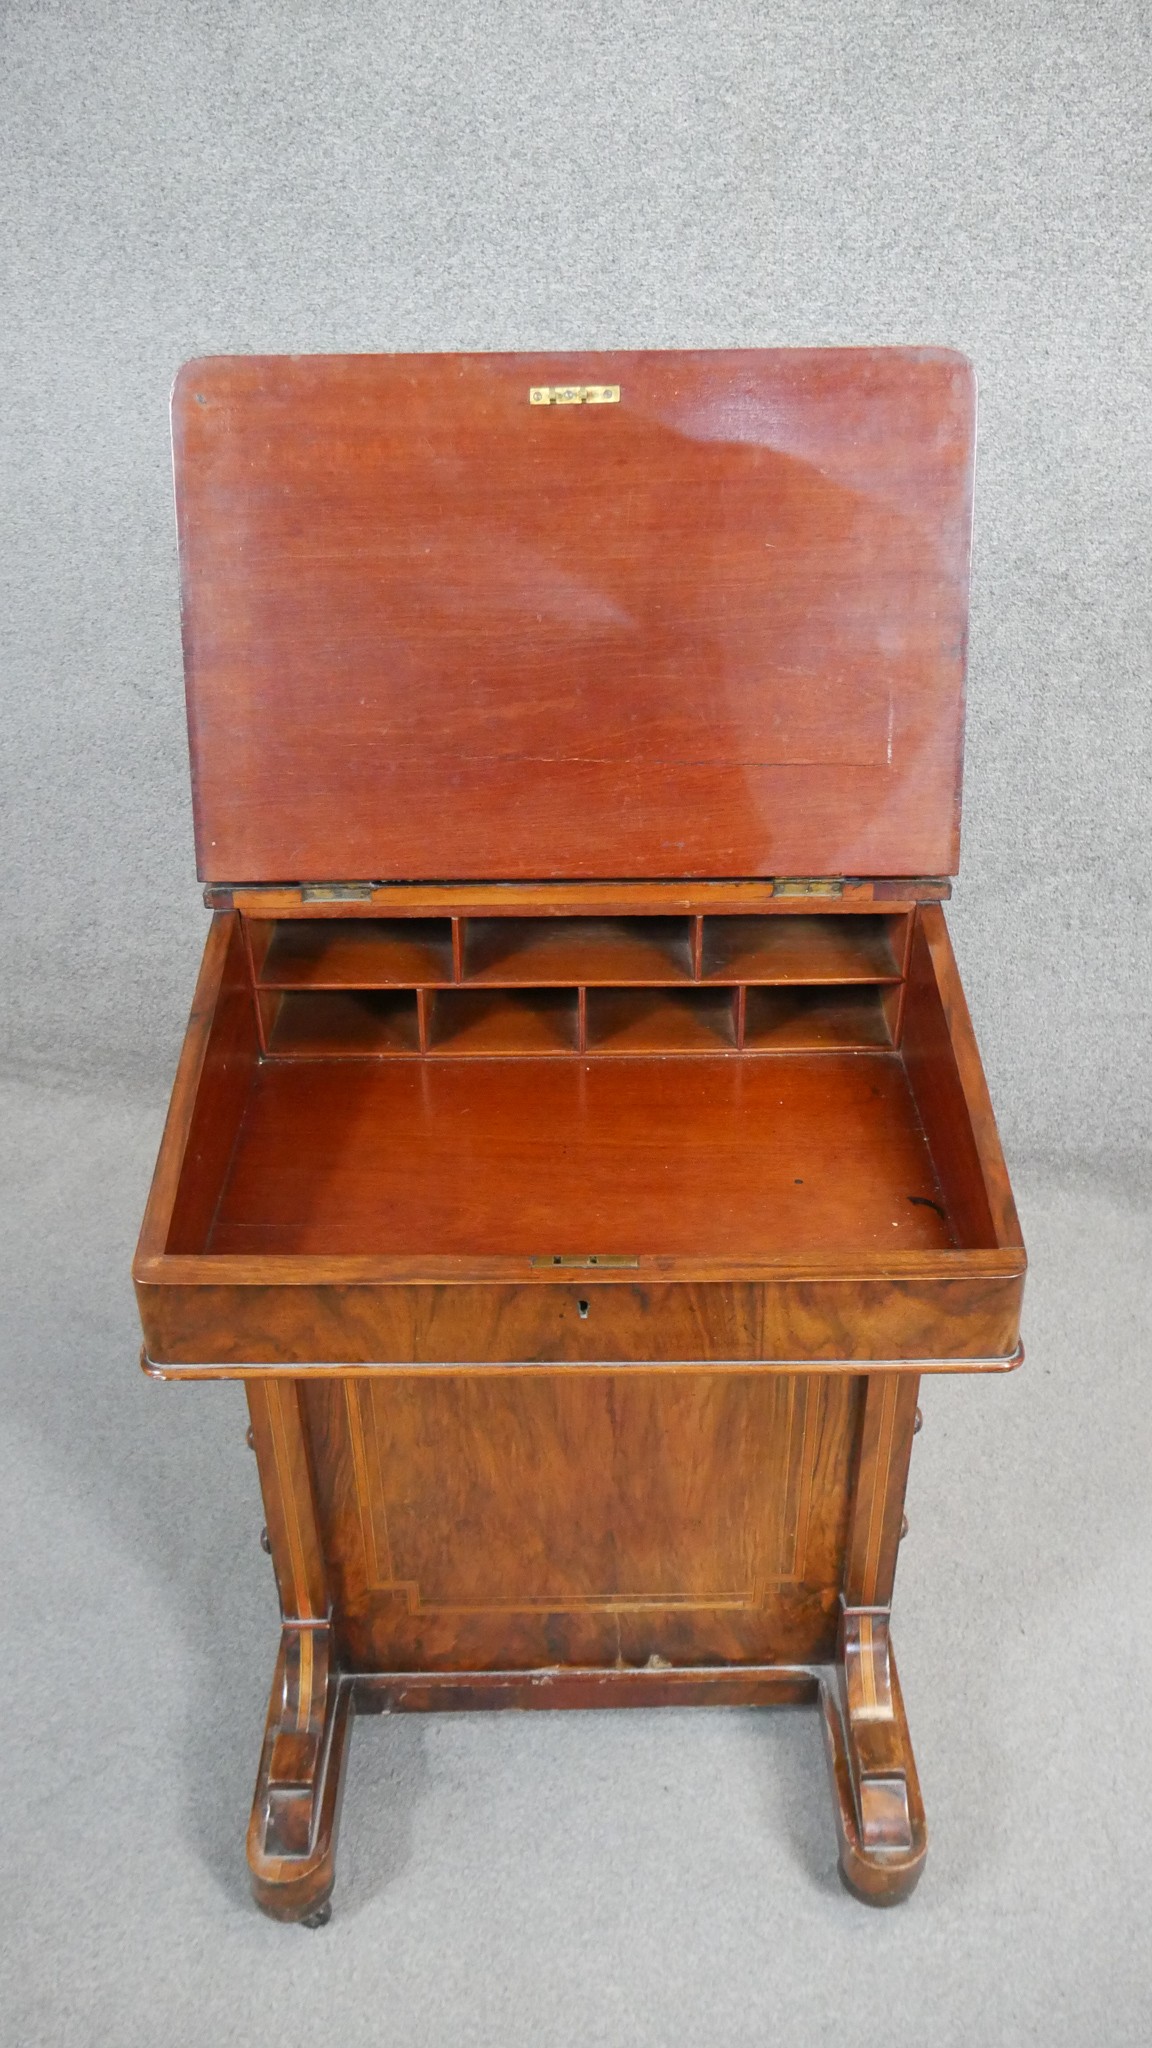 A 19th century figured walnut Davenport with brass galleried and fitted superstructure above leather - Image 6 of 7